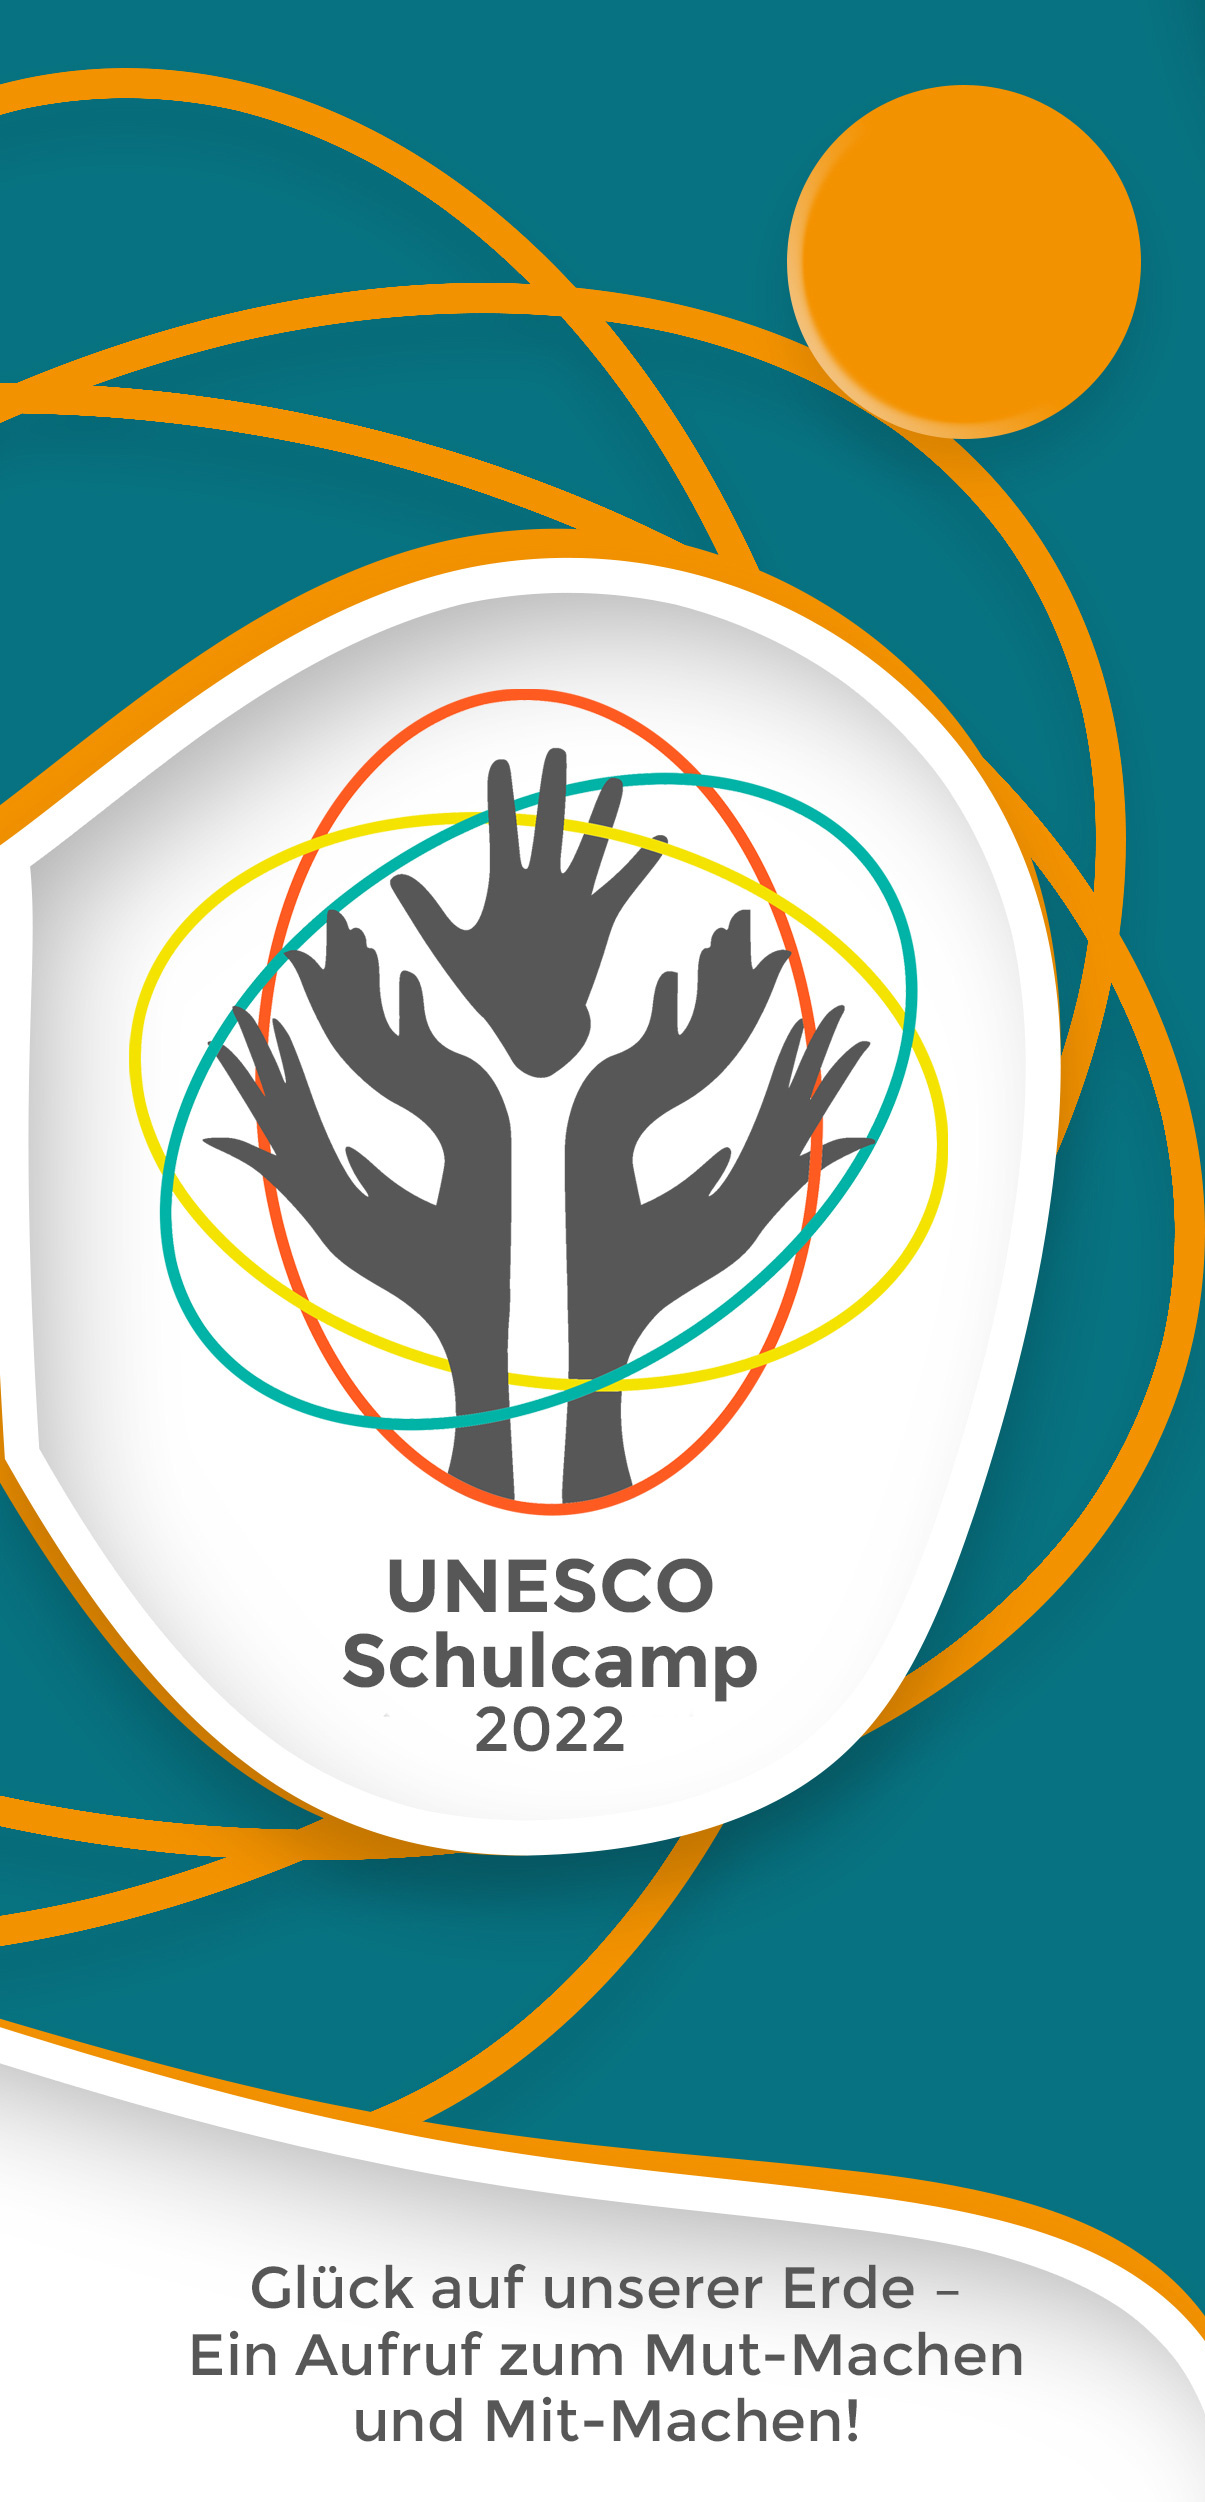 The UNESCO School Camp was organised by the “Uferlos” depart-ment of AGJF Sachsen e. V.